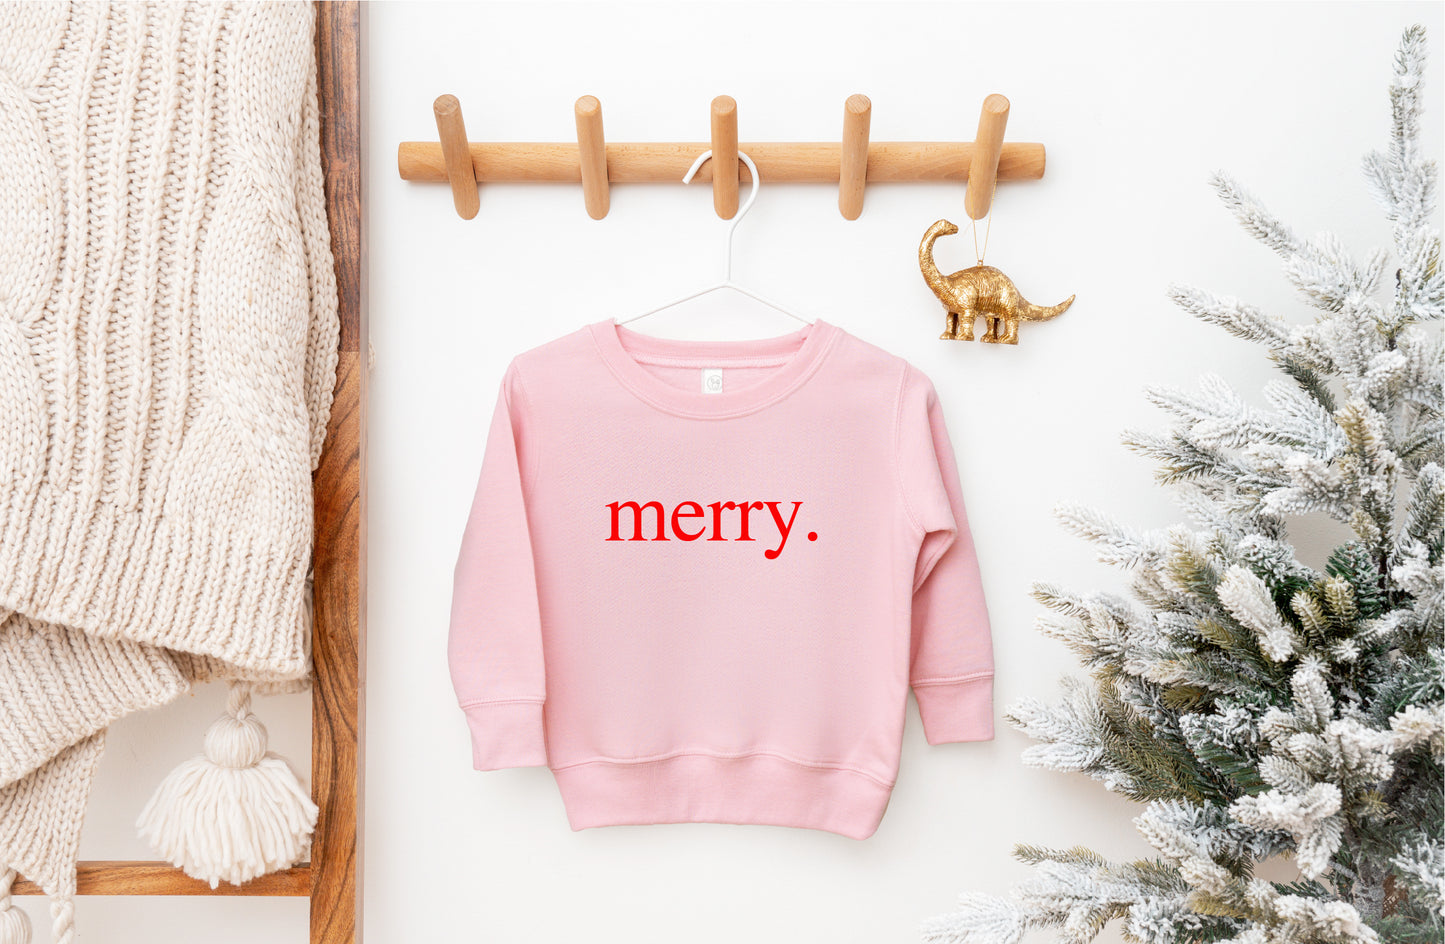 MERRY. SWEATER <br> More colors available